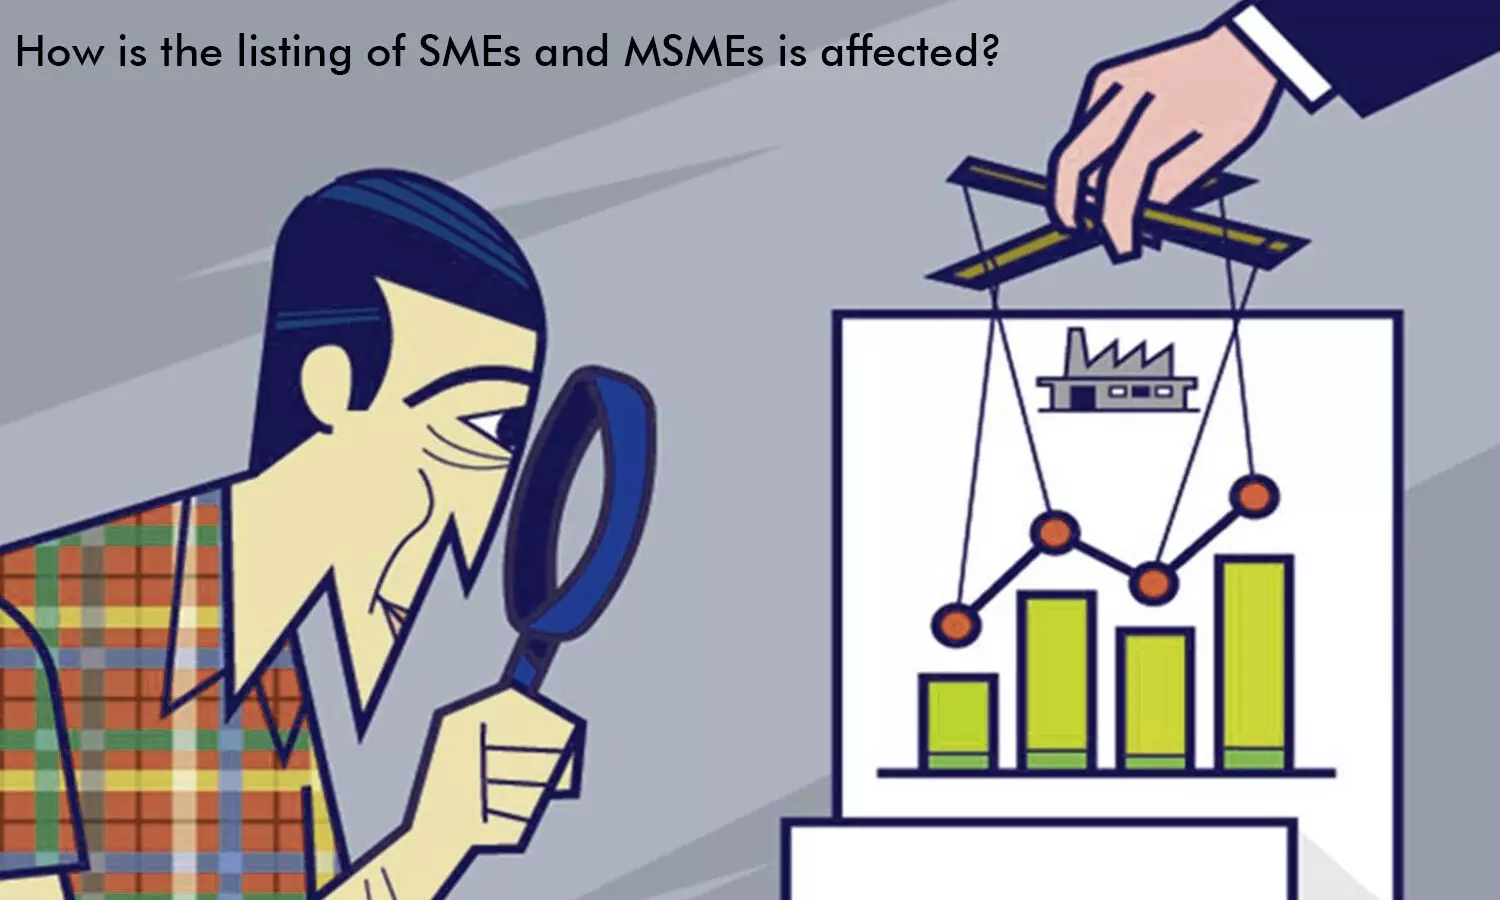 How is the listing of SMEs and MSMEs affected?